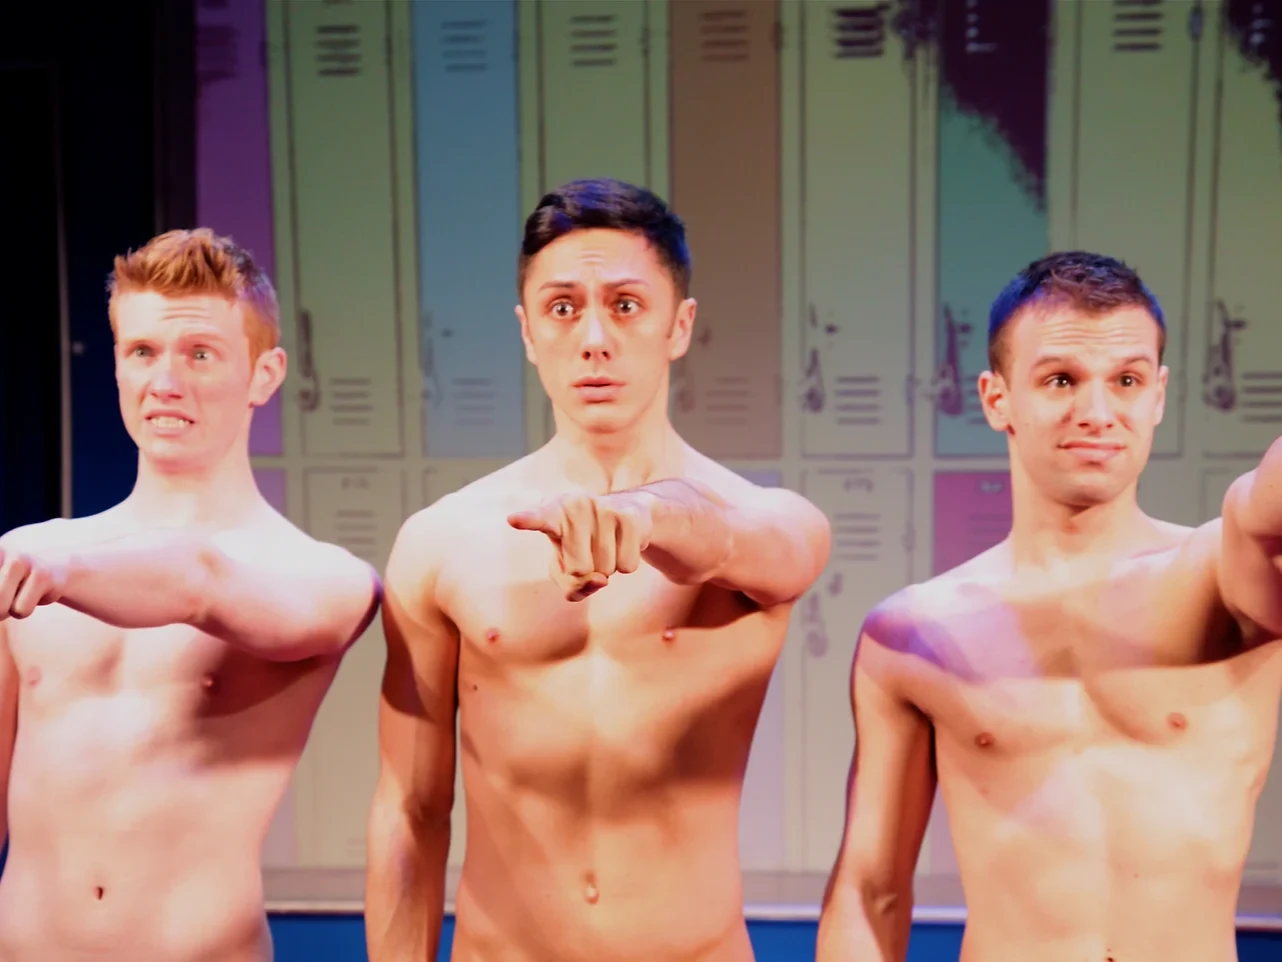 Naked Boys Singing: What to expect - 3